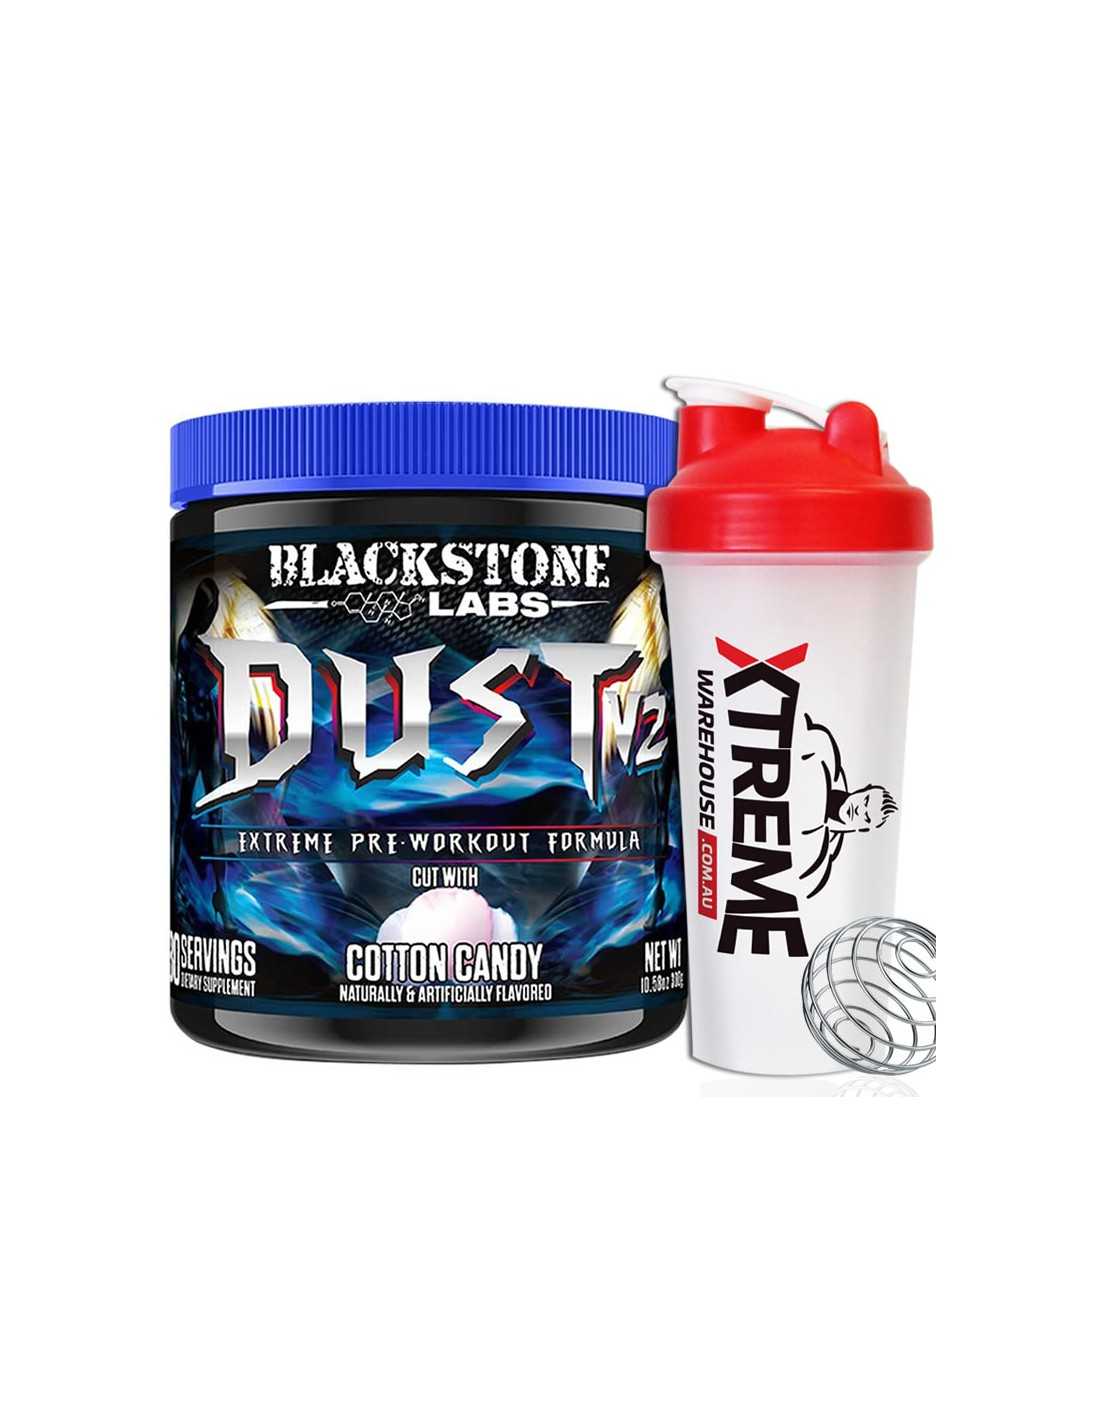 5 Day Blackstone Labs Pre Workout for Burn Fat fast